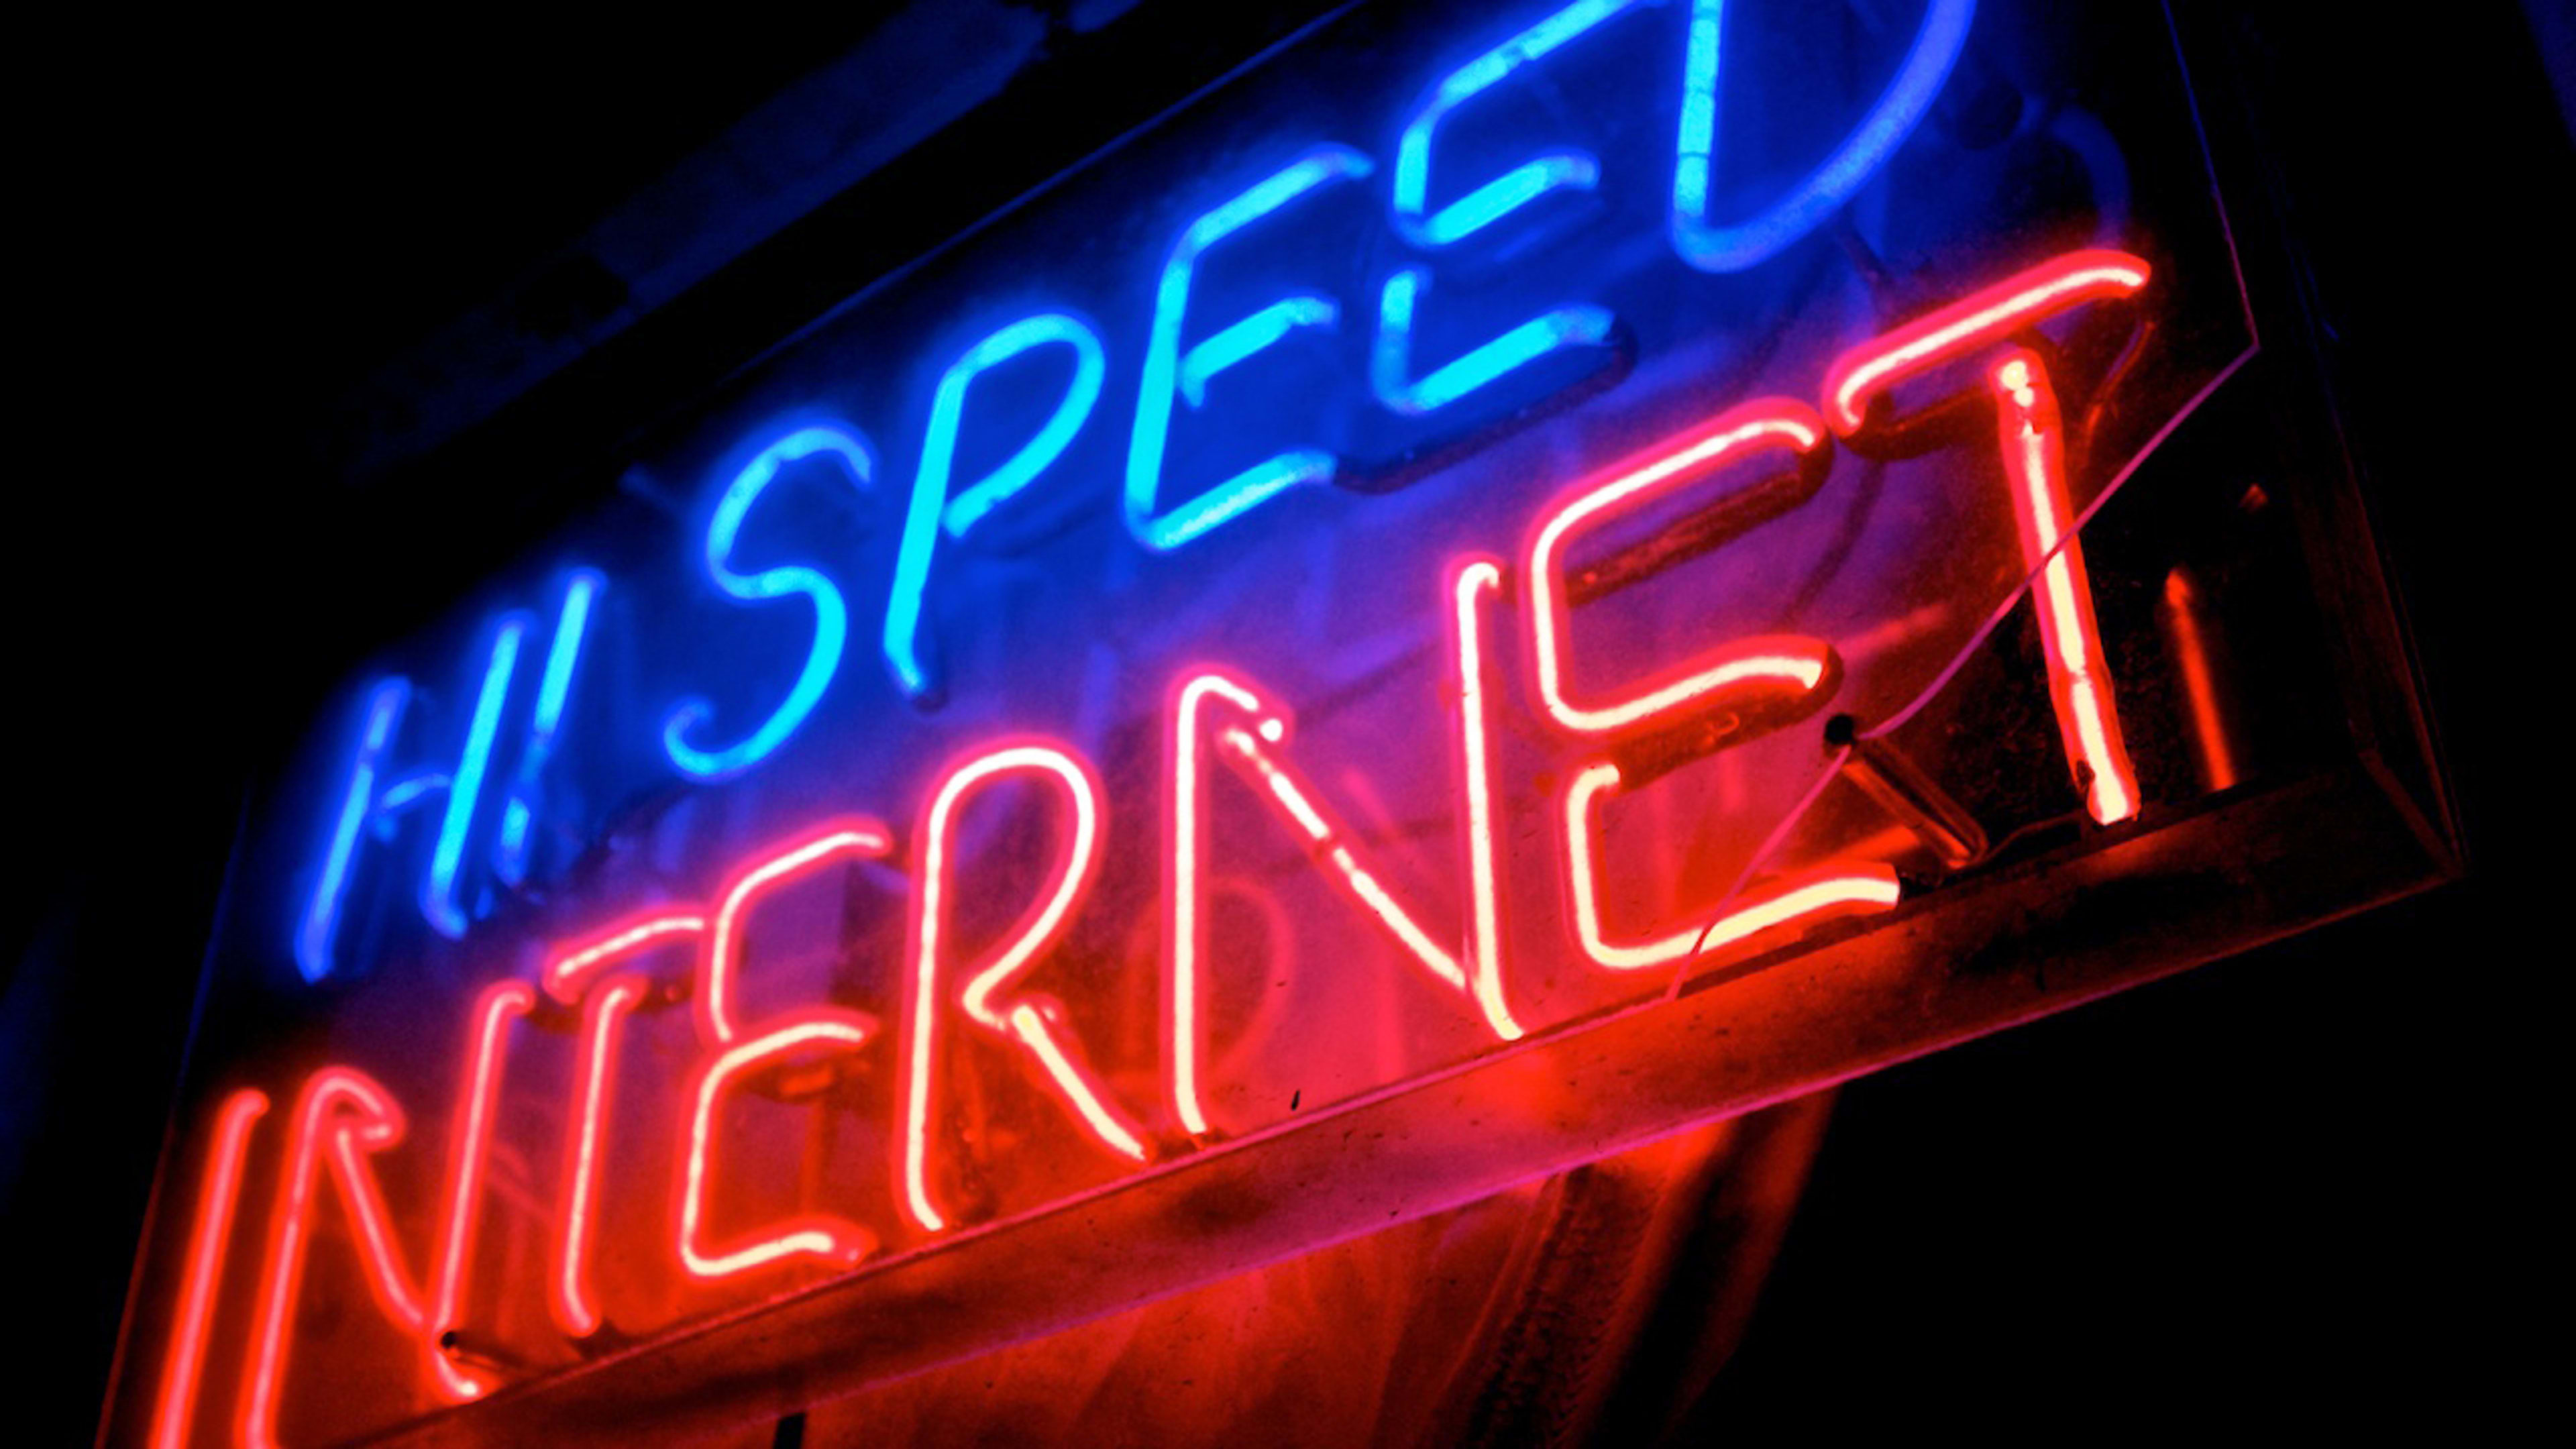 Nationwide wireless speed test gives T-Mobile and Verizon bragging rights